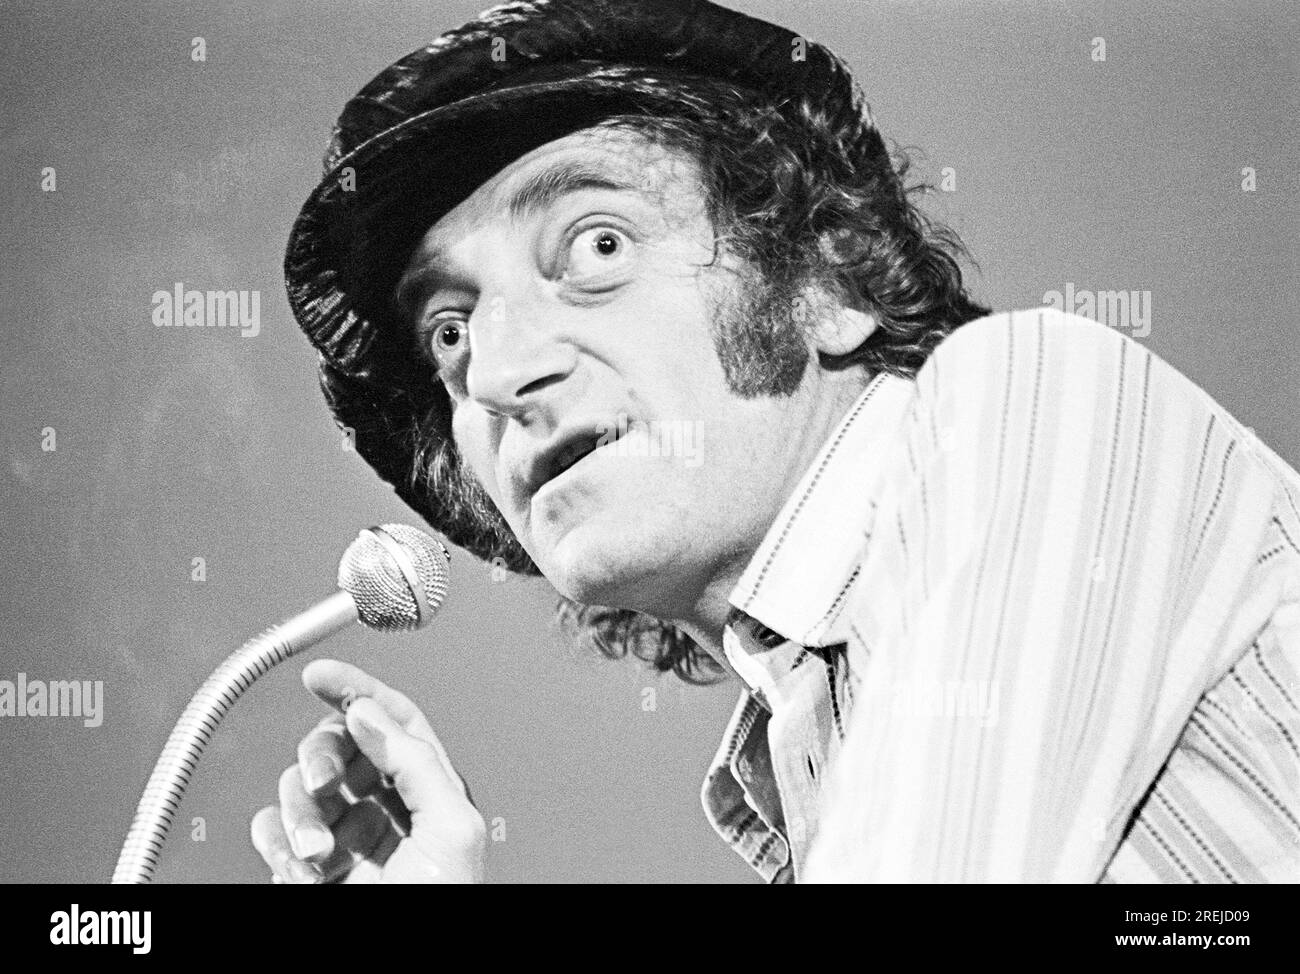 British actor, comedian and comedy writer Marty Feldman (1934-1982) on stage at CINEMA CITY - An Exhibition of 75 Years of Moving Pictures at the Round House, London NW1 in October 1970 Stock Photo